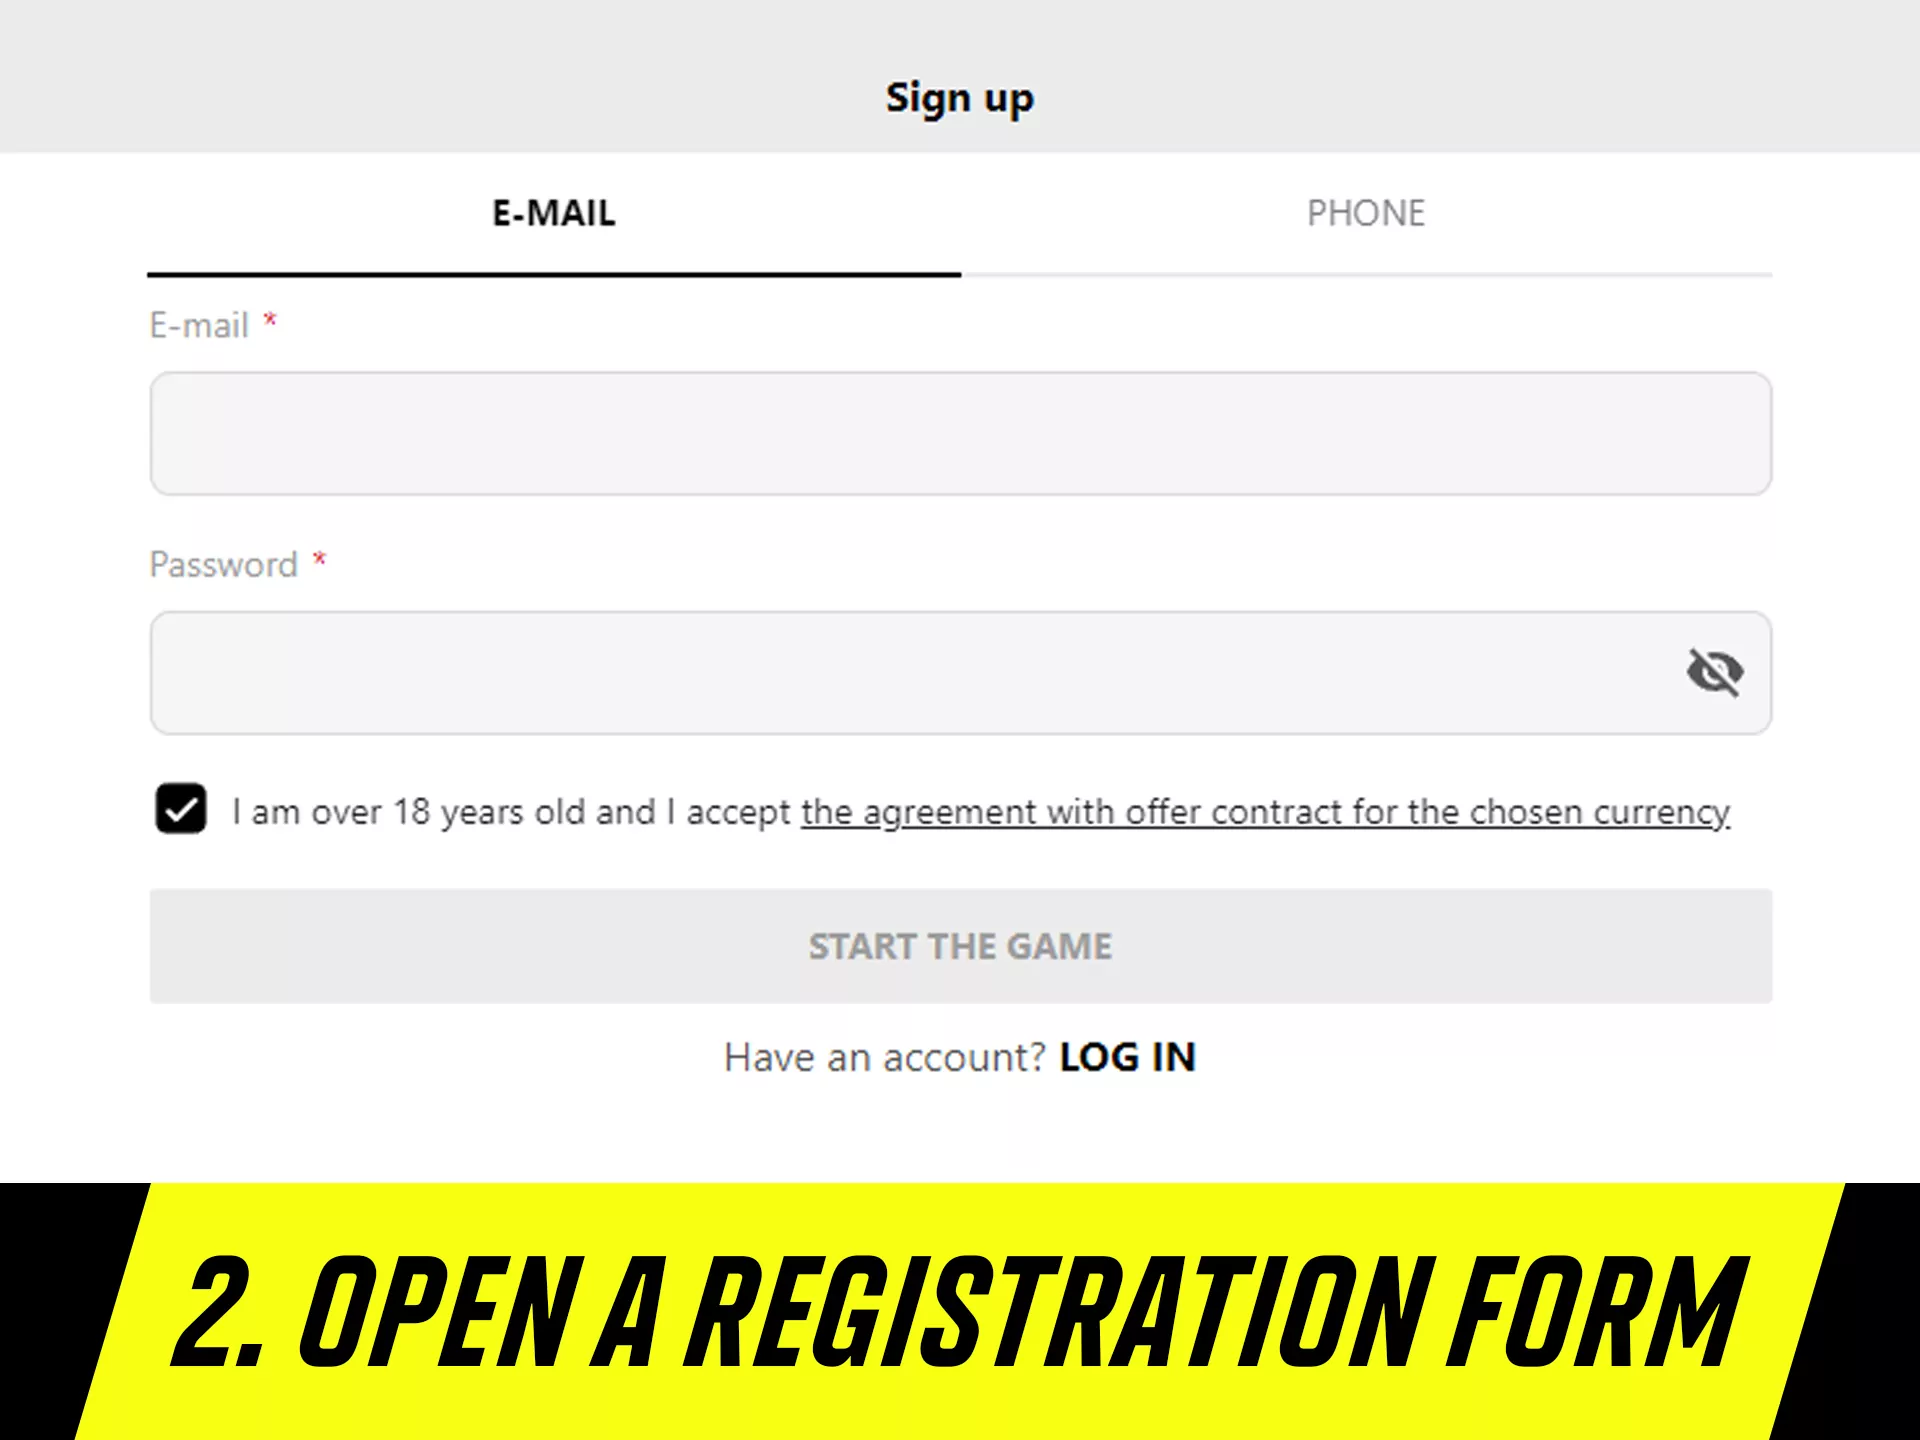 Click sign up button.